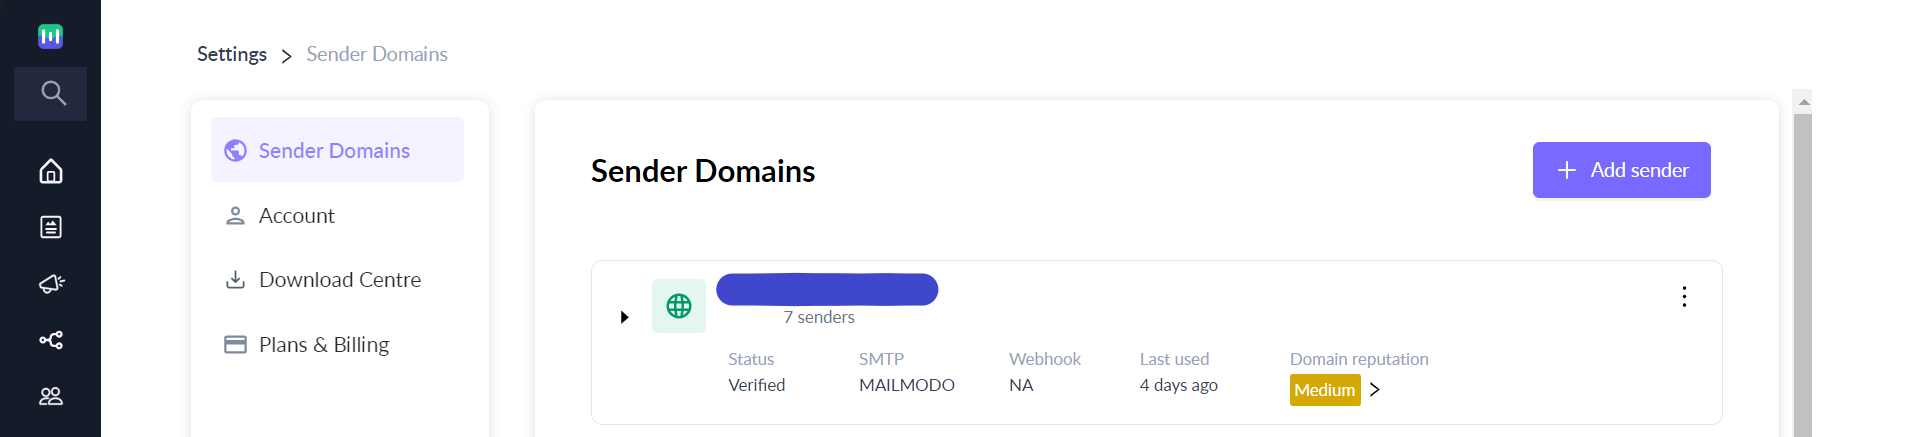 How to view your domain reputation in Mailmodo?